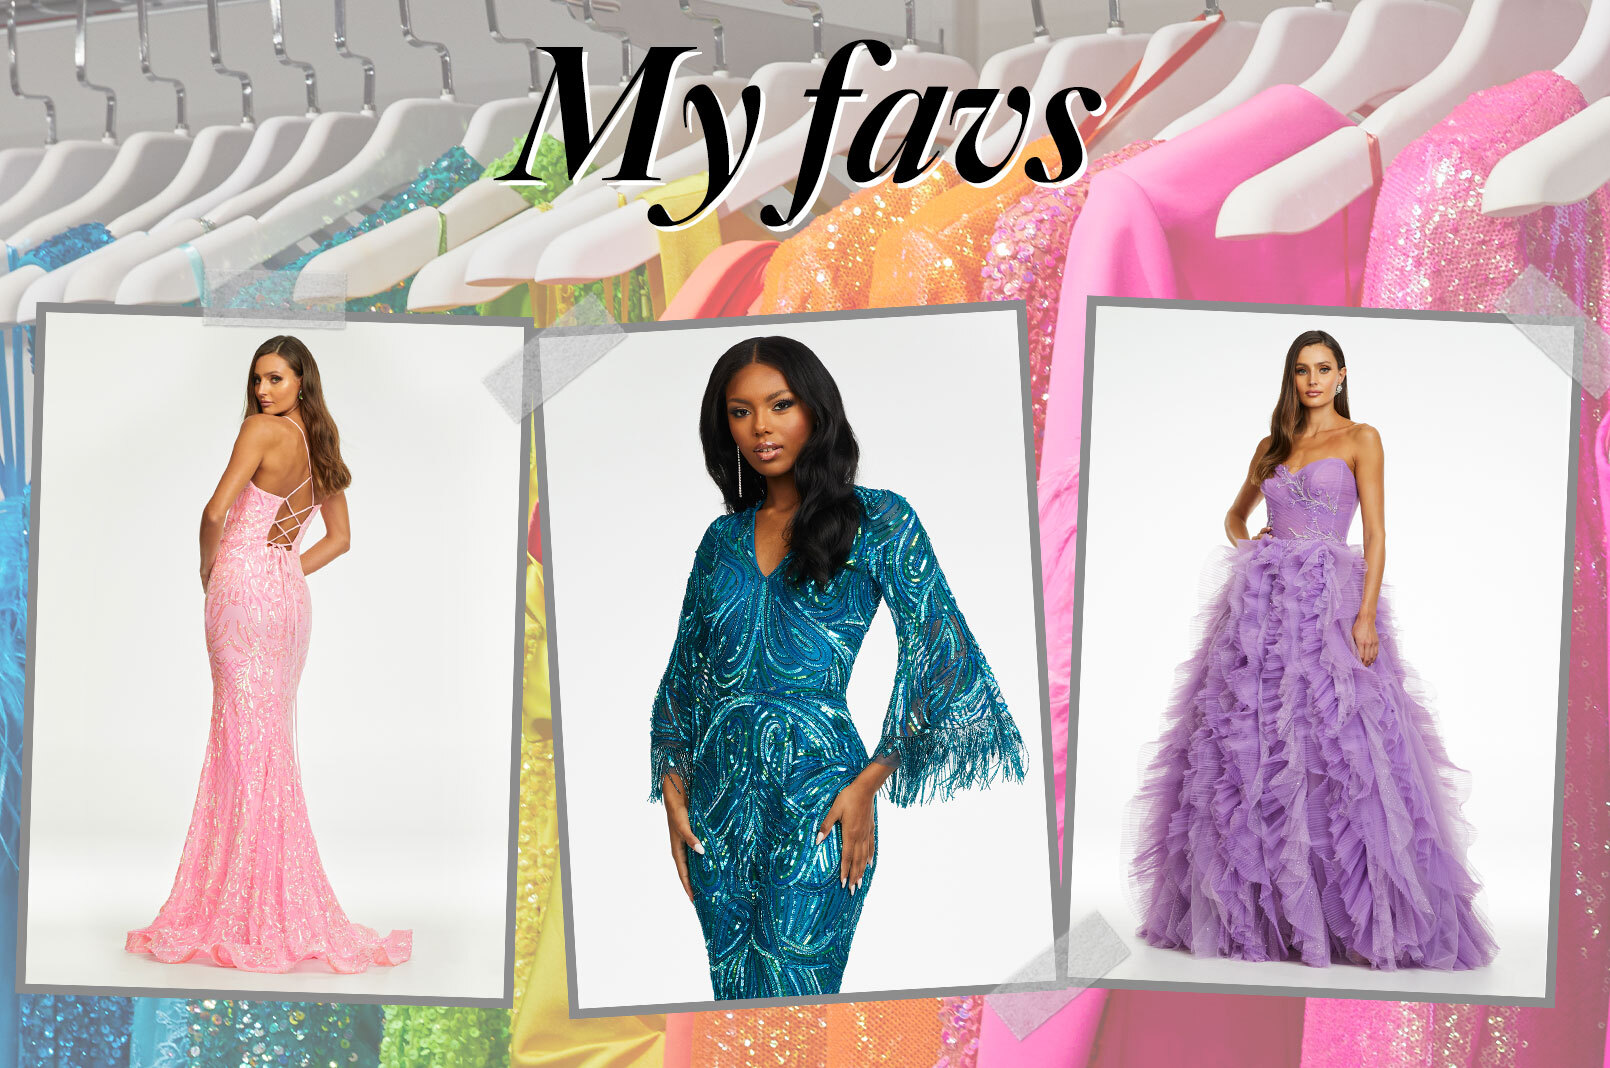 My favs image of ivory, pink feathers and jade green dresses